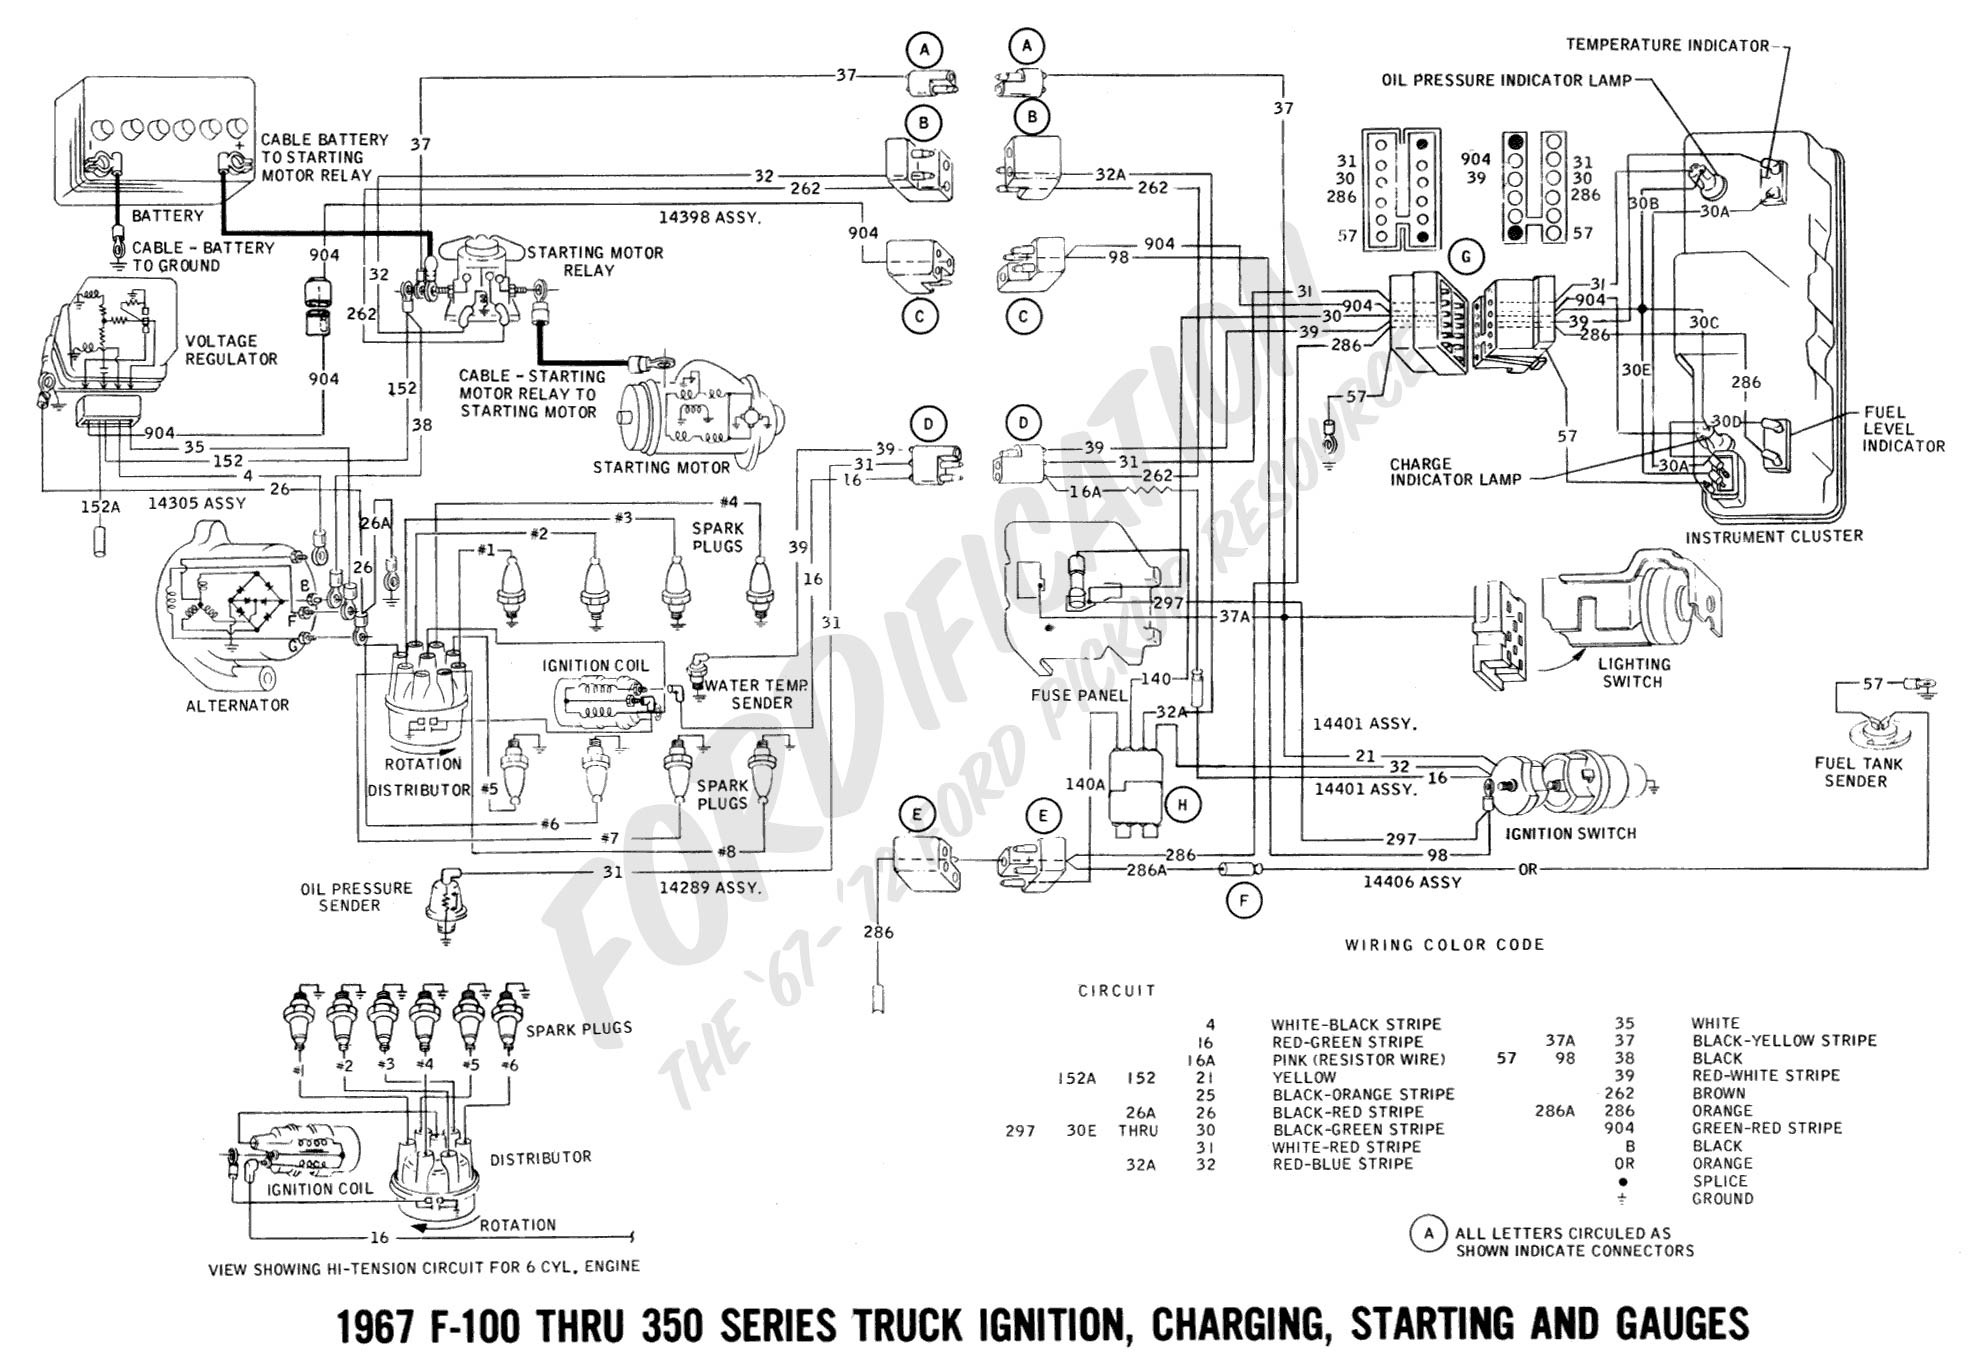 2002 ford Explorer Engine Diagram ford Truck Technical Drawings and Schematics Section H Wiring